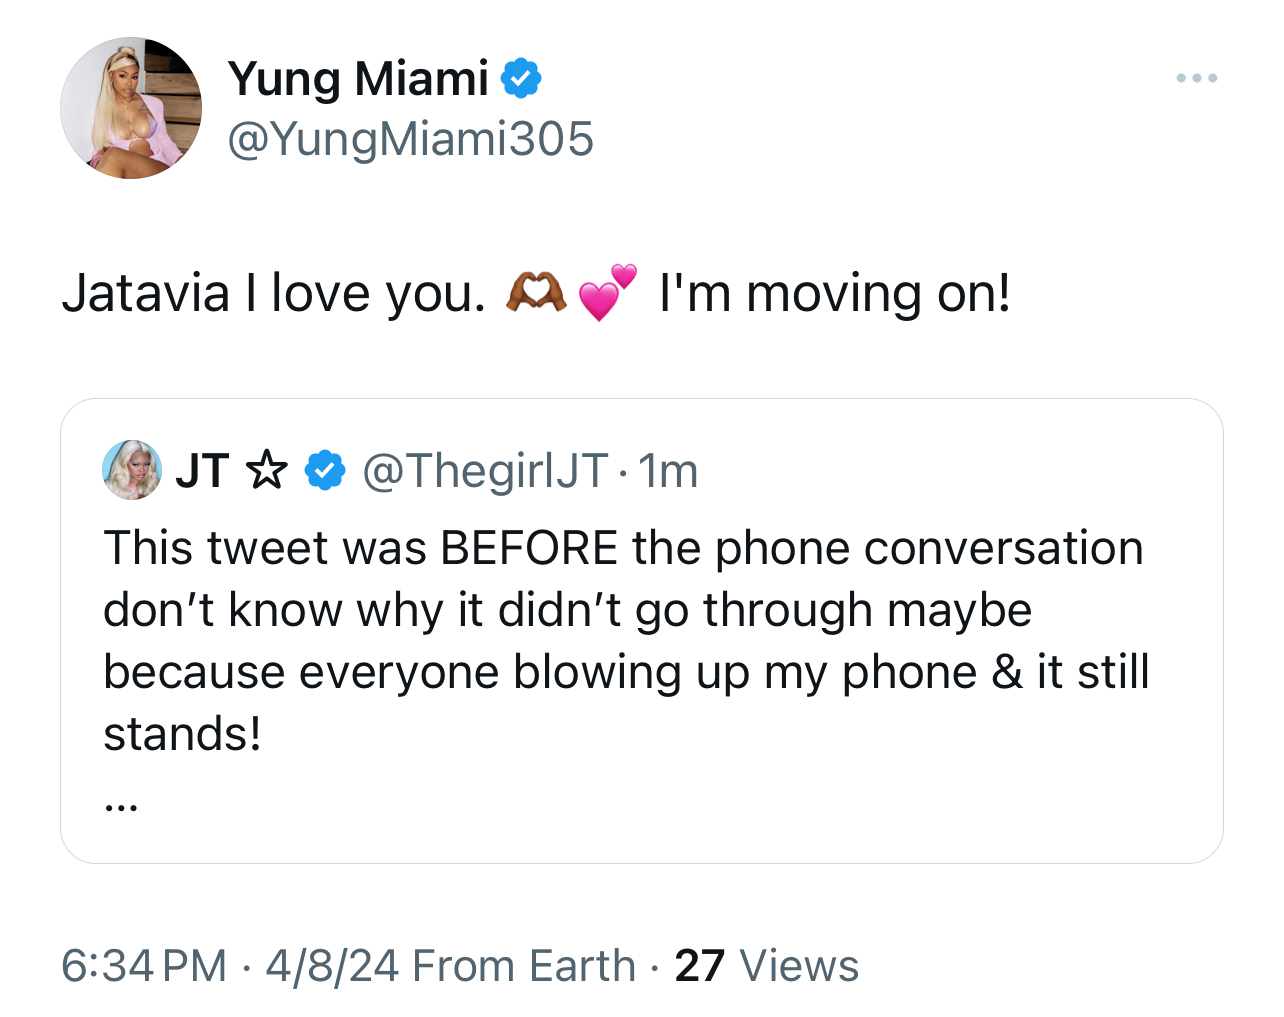 Tweet by JT expressing love for Jatavia and mentioning a phone call issue due to many incoming calls